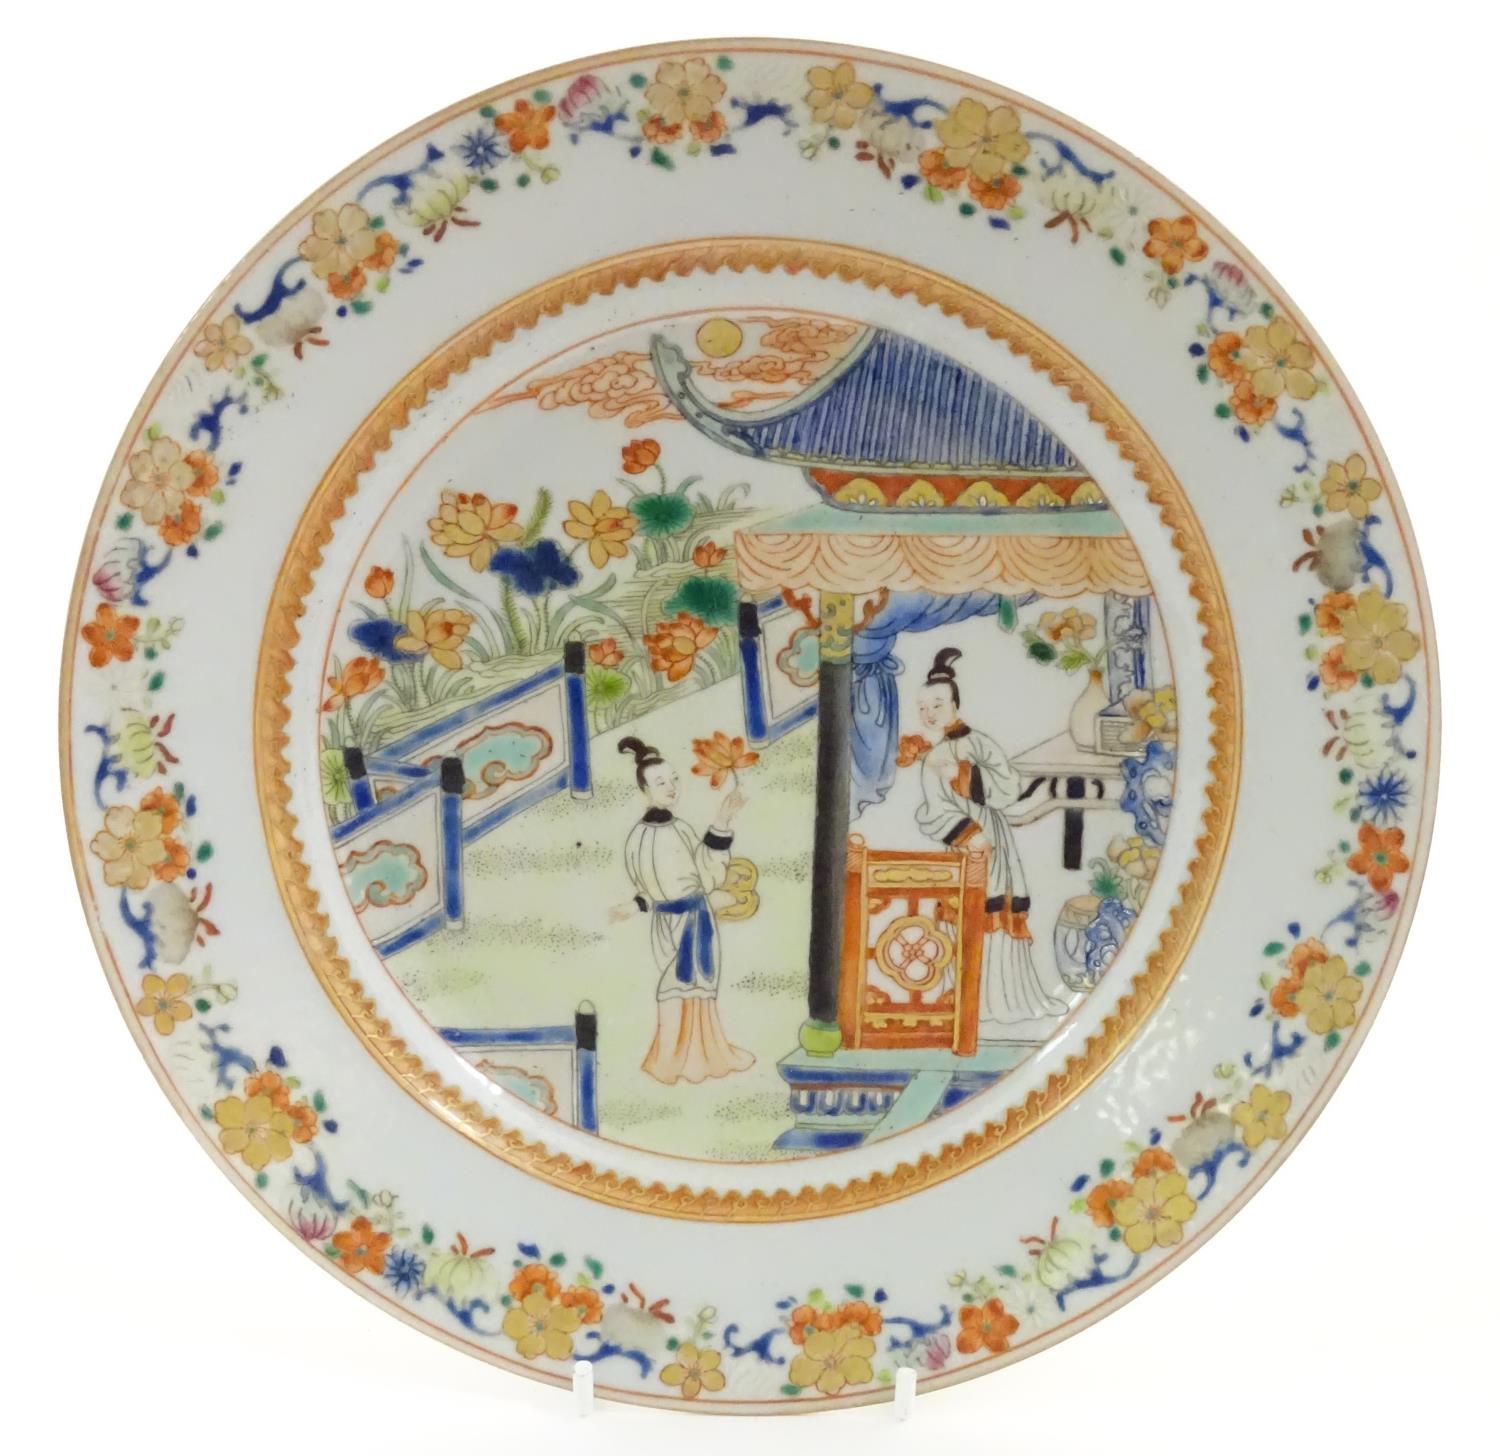 A Chinese plate depicting two ladies in a garden terrace with flowers, foliate, vases, etc. - Image 3 of 6